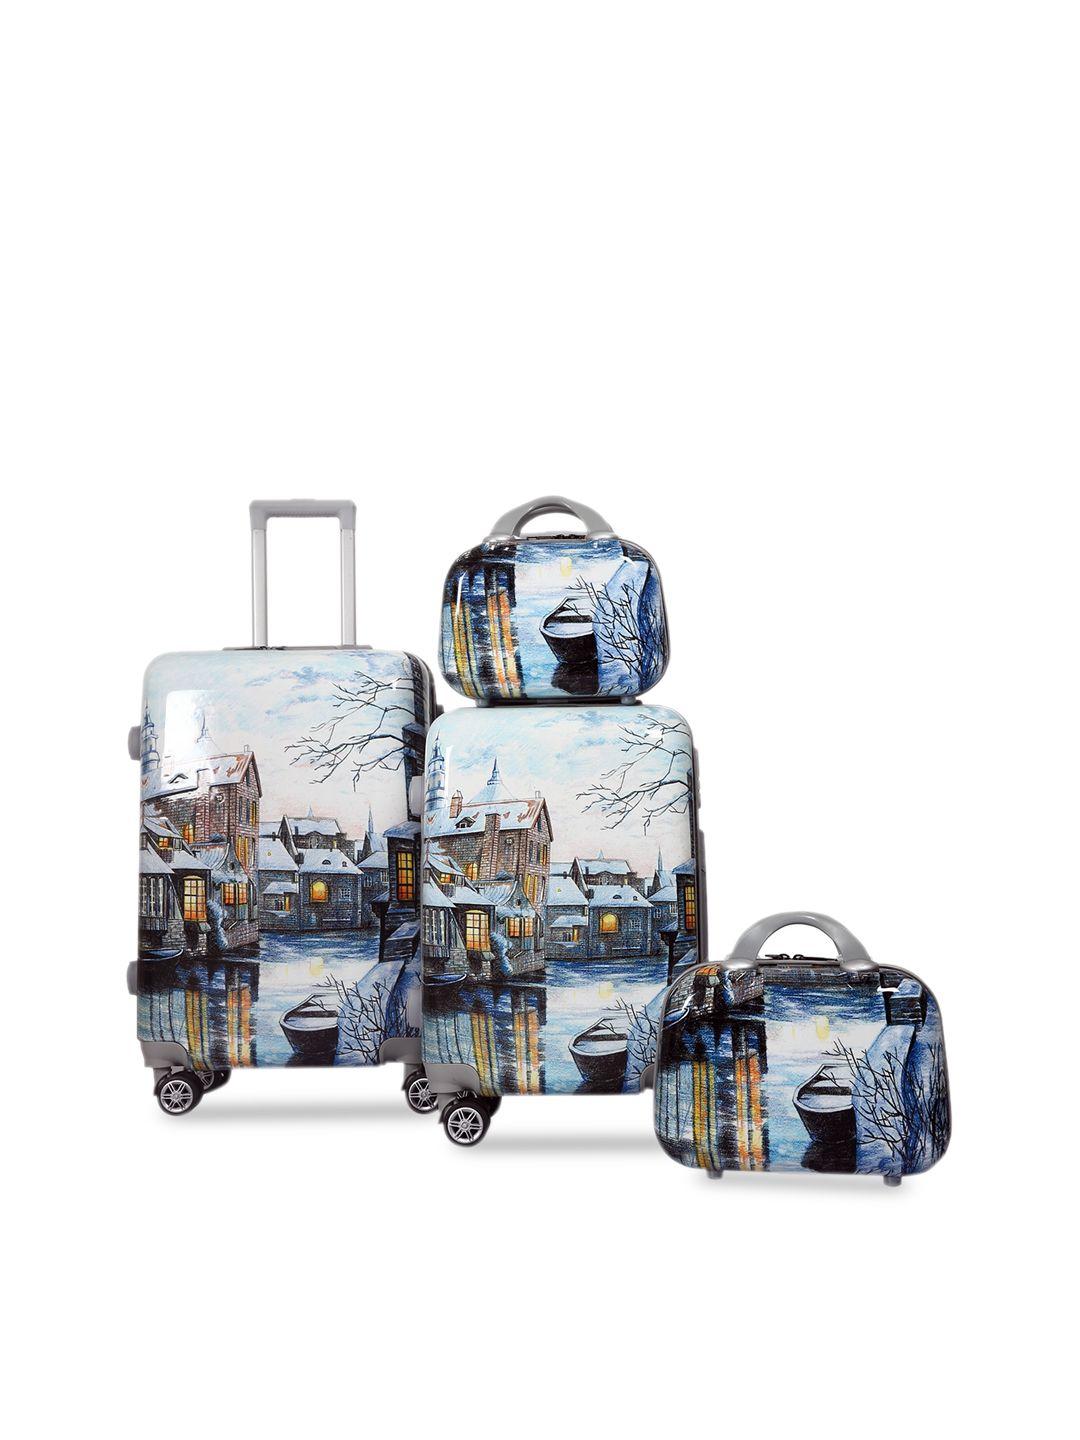 polo-class-set-of-4-trolley-suitcases-&-vanity-bags